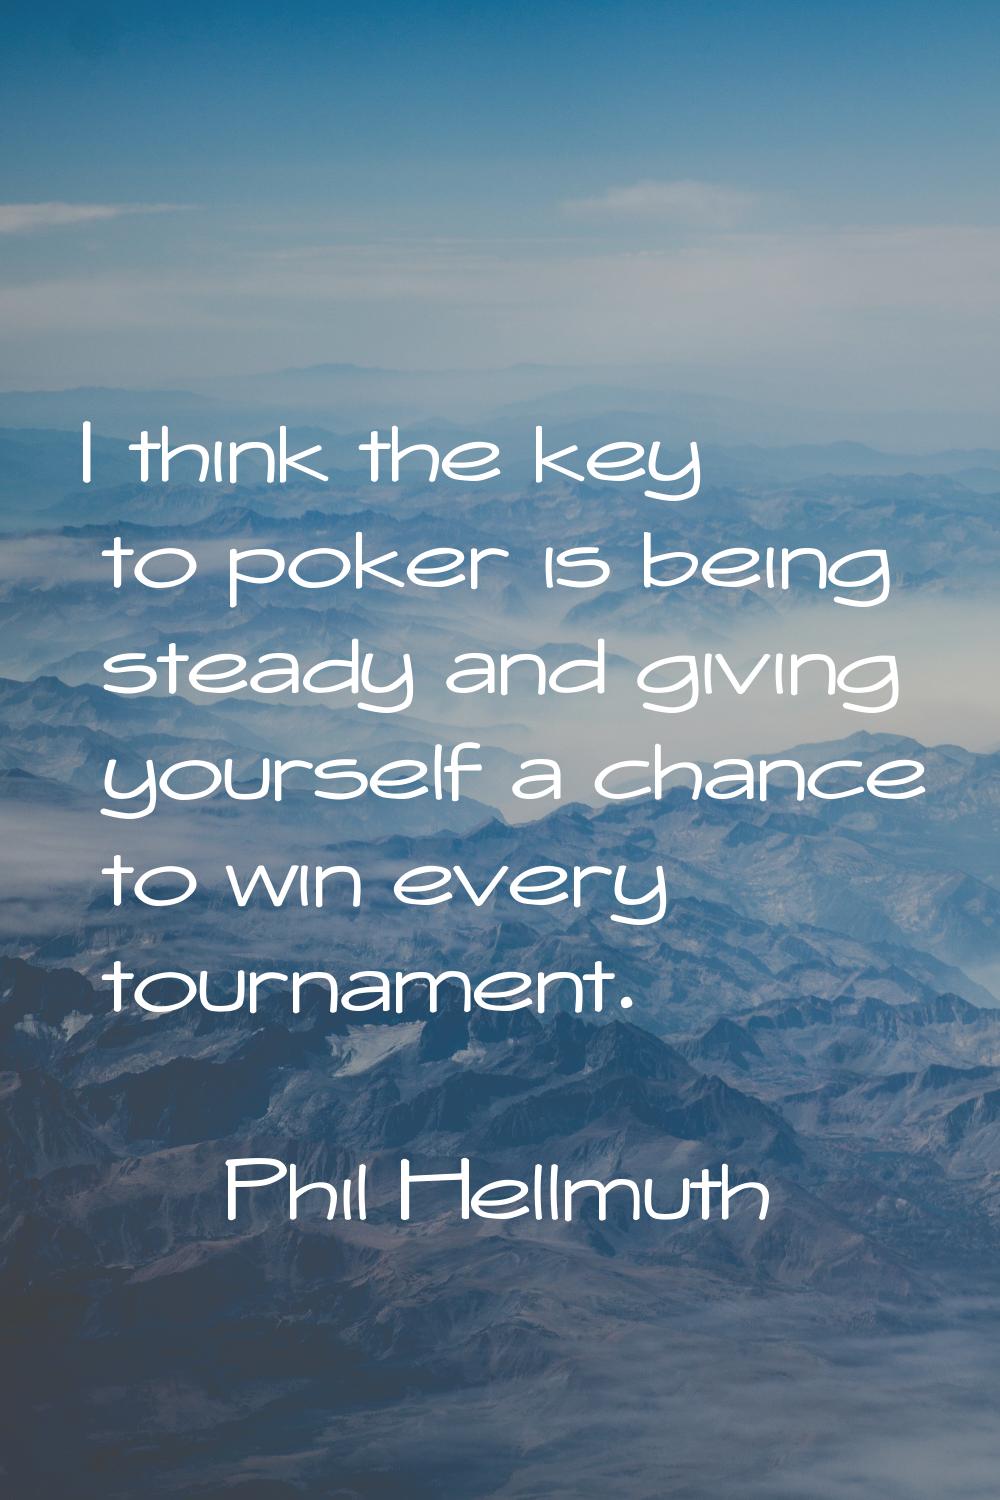 I think the key to poker is being steady and giving yourself a chance to win every tournament.